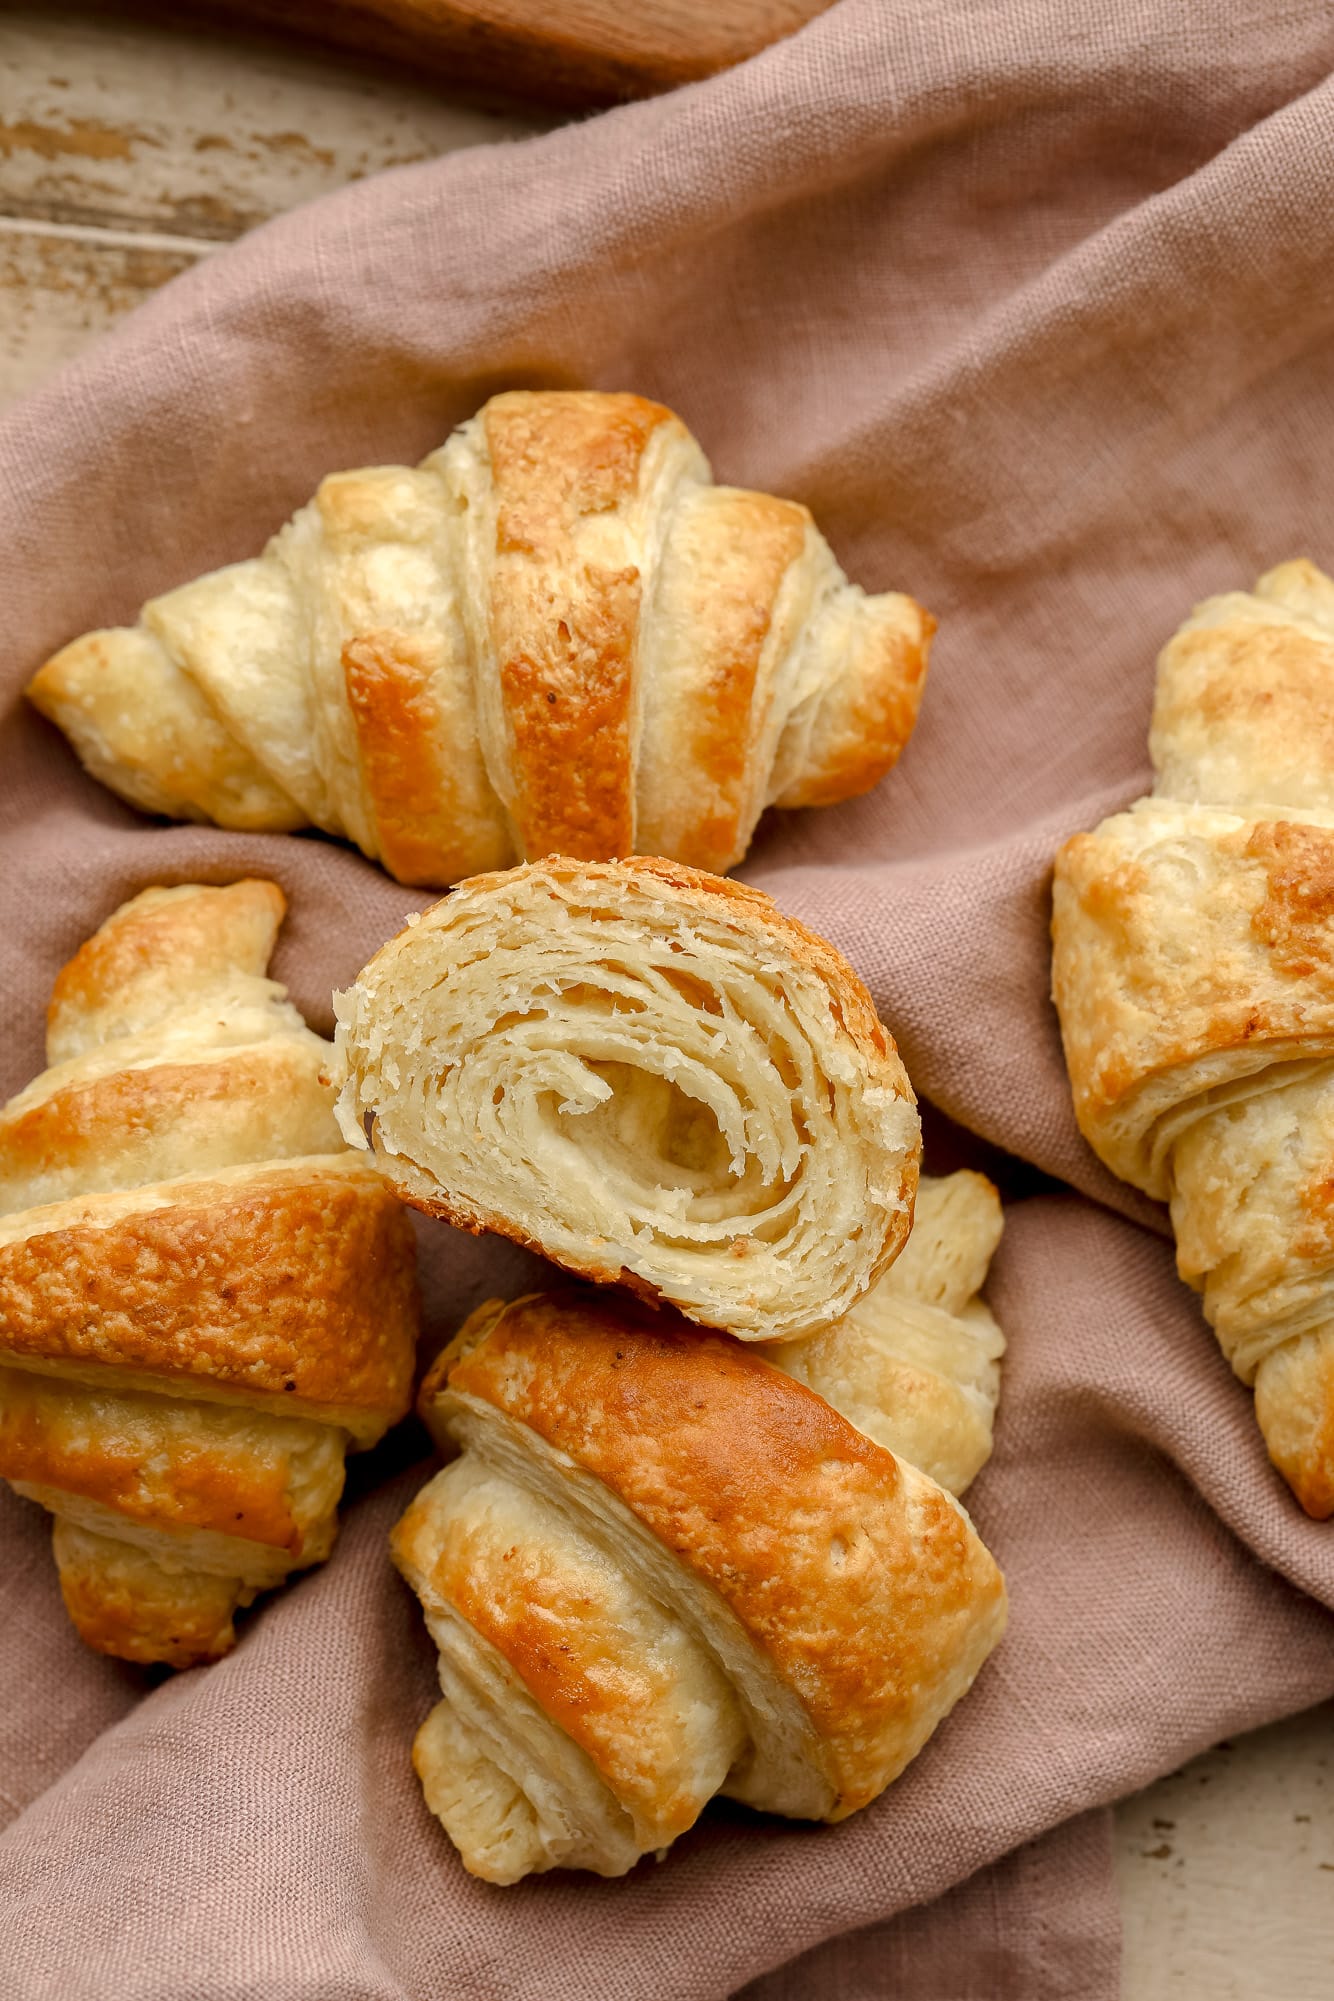 baked vegan croissants on a rose-colored kitchen towel.